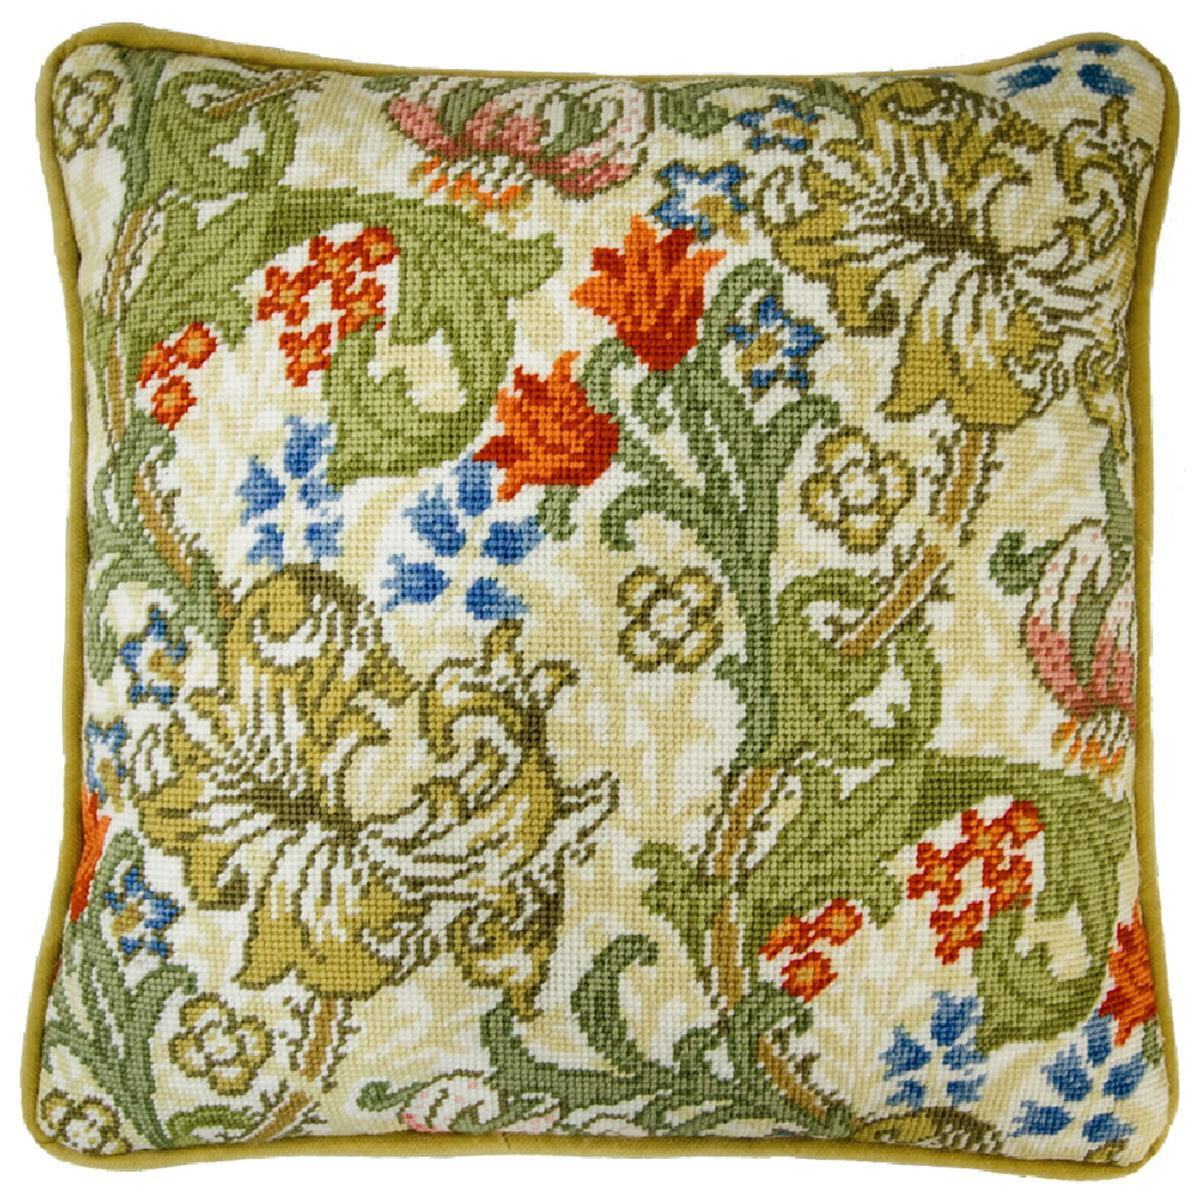 A square cushion with a colorful, intricate tapestry...